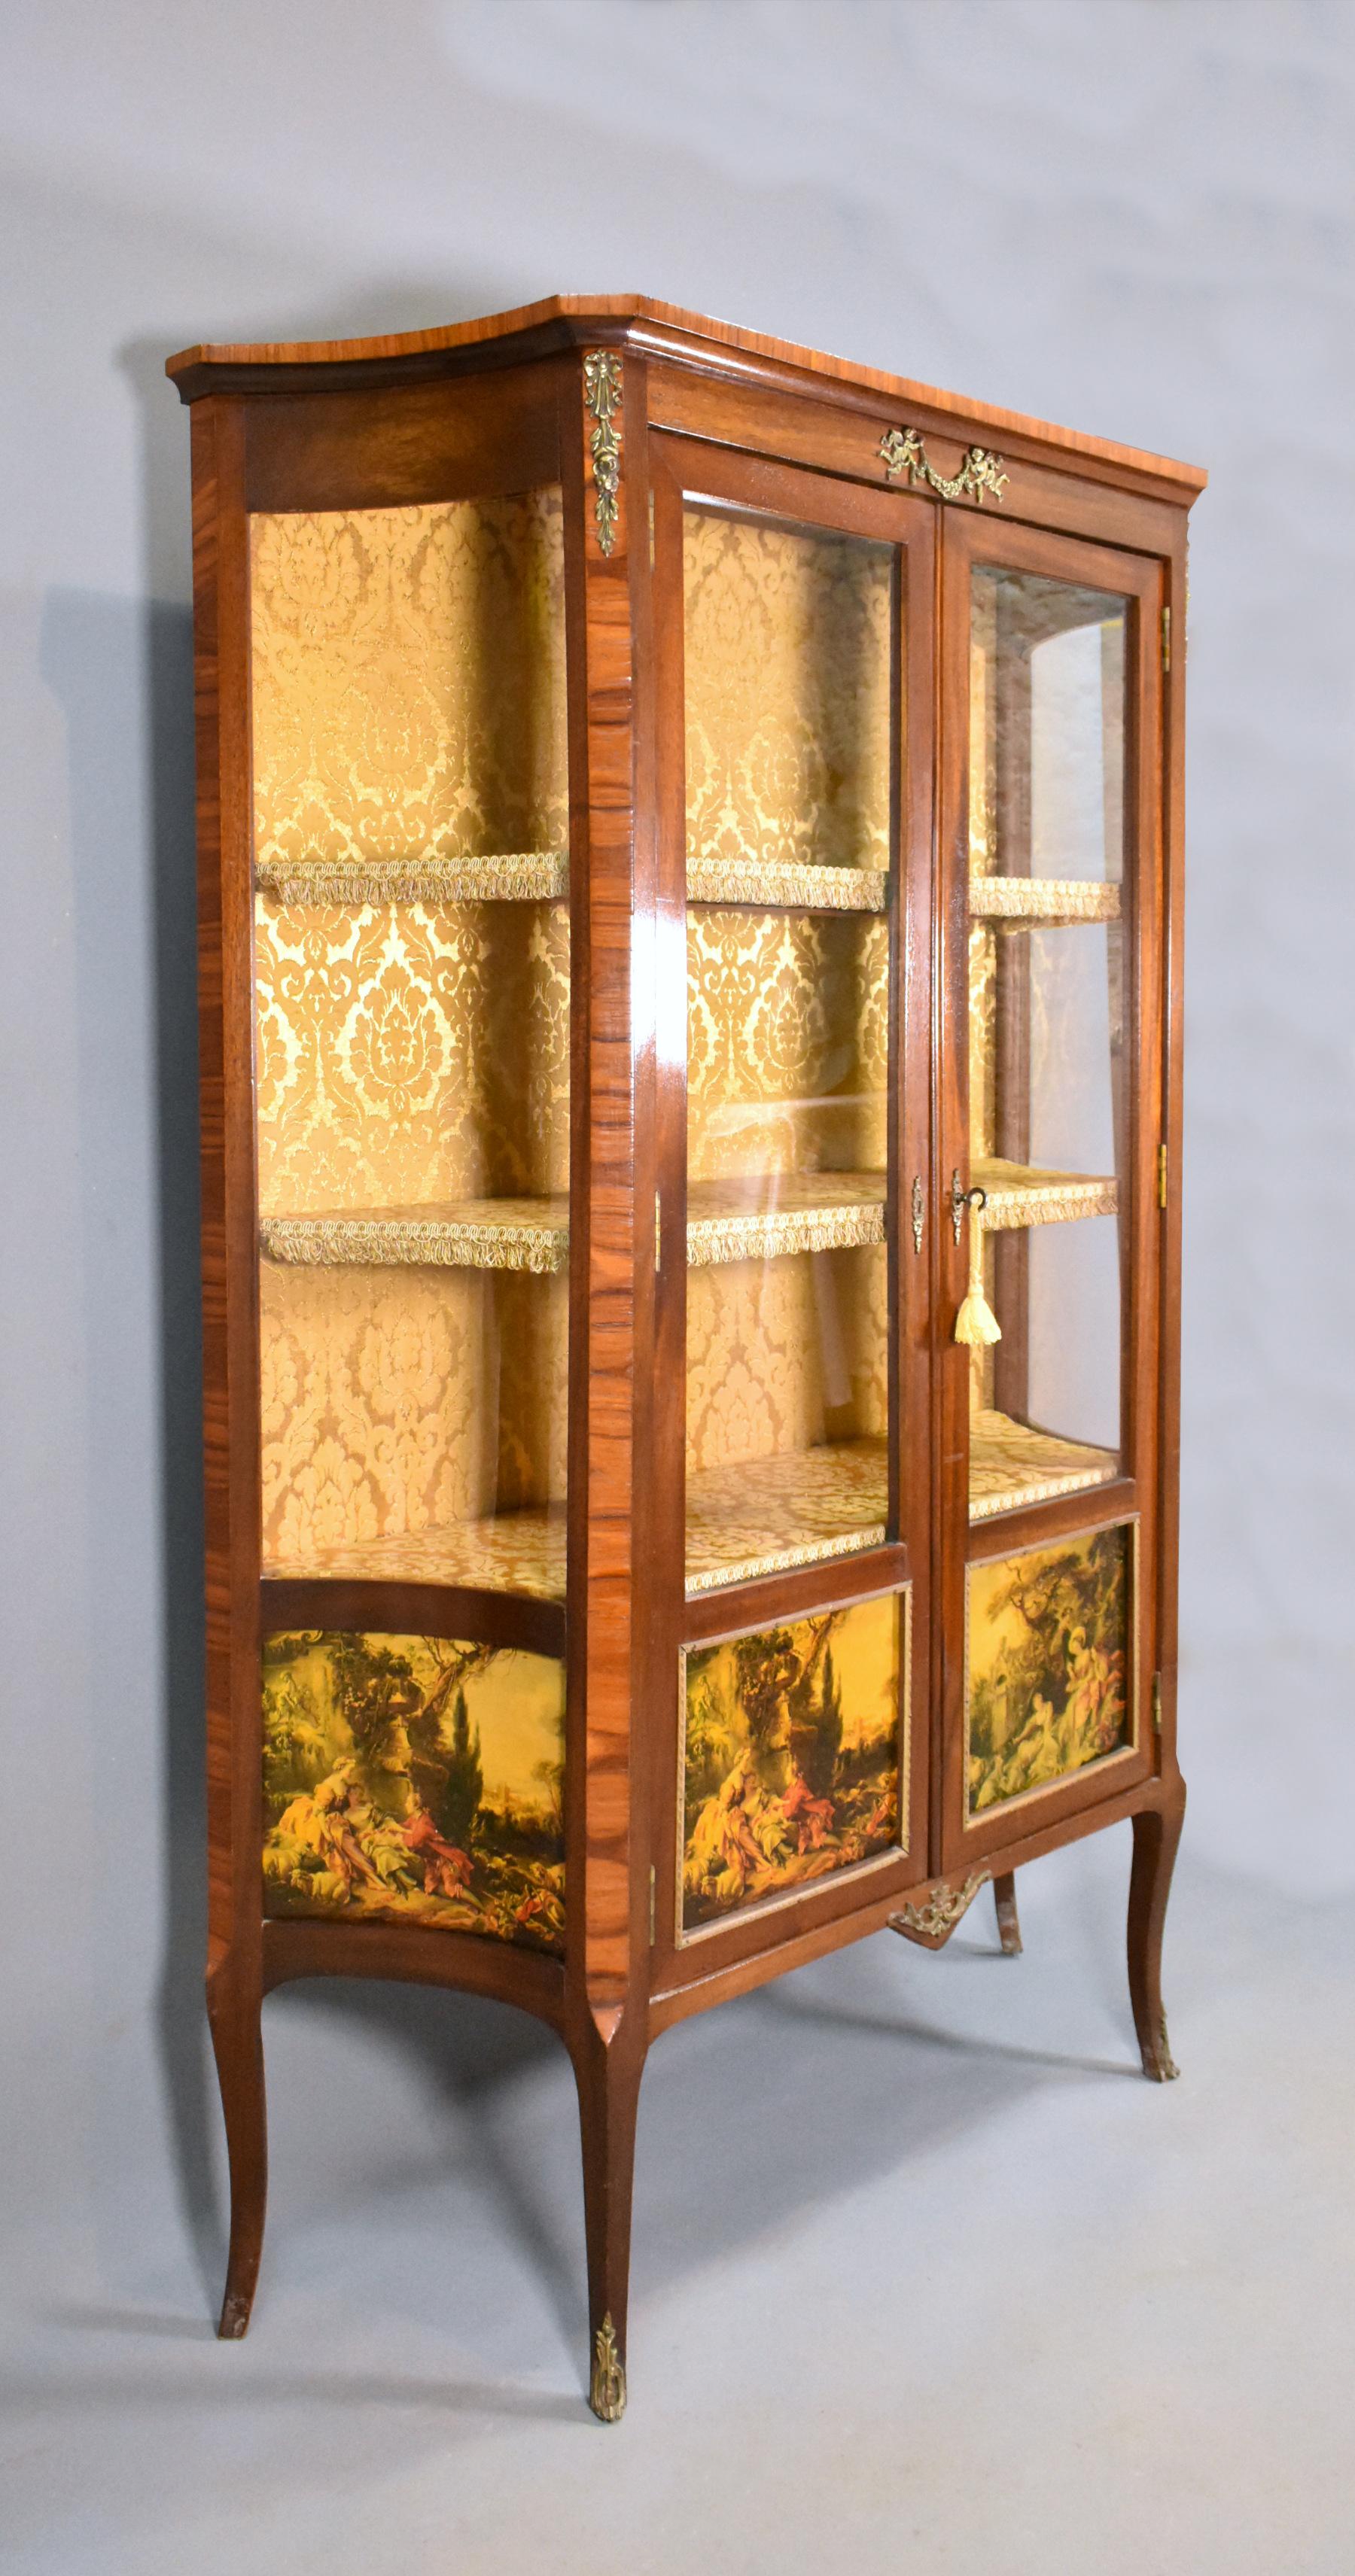 French Vernis Martin style vitrine / display cabinet in walnut and sapele mahogany.

A very pretty vitrine / display cabinet in the style of Vernis Martin, this piece is constructed in sapele mahogany, cross-banded in veneer walnut and decorated